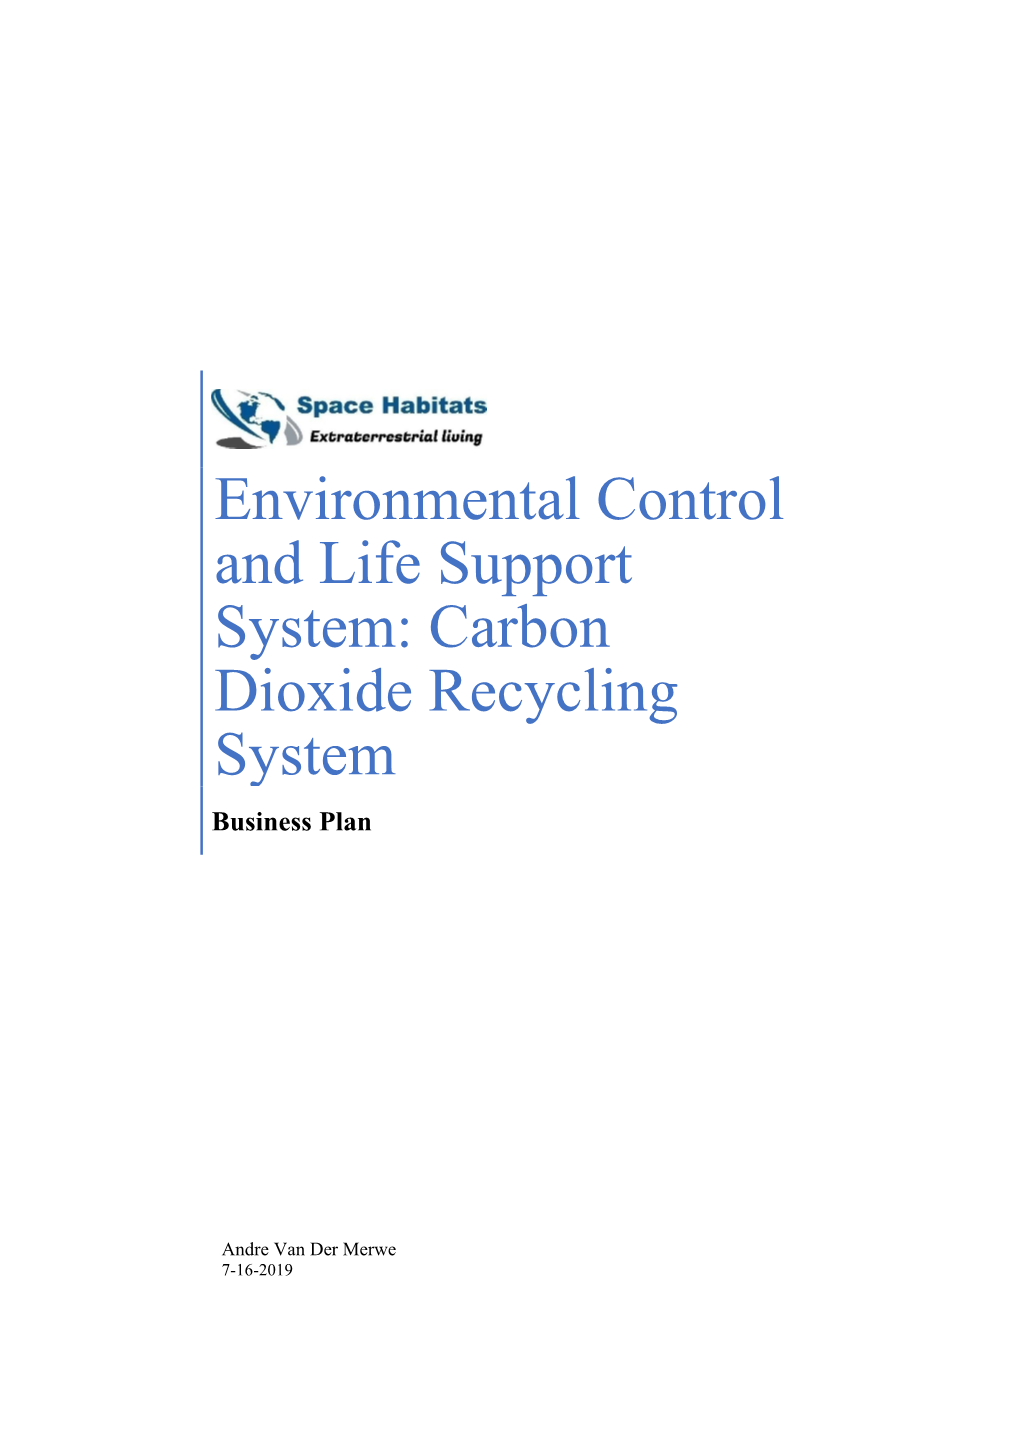 Environmental Control and Life Support System: Carbon Dioxide Recycling System